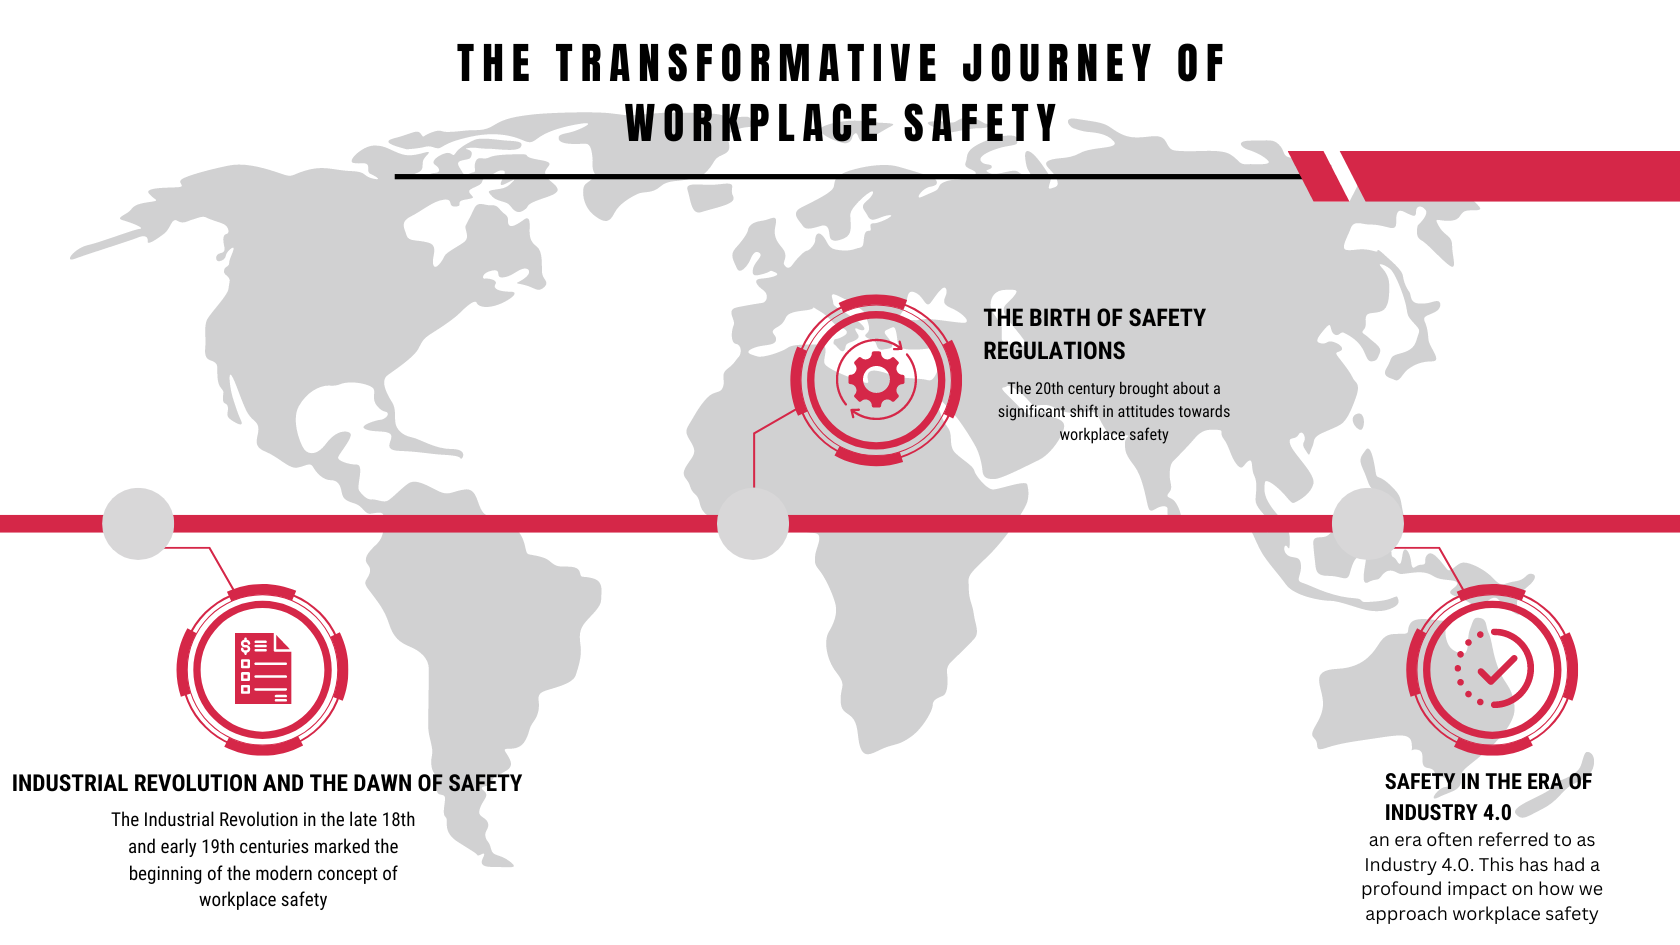 The Transformative Journey of Workplace Safety (2)